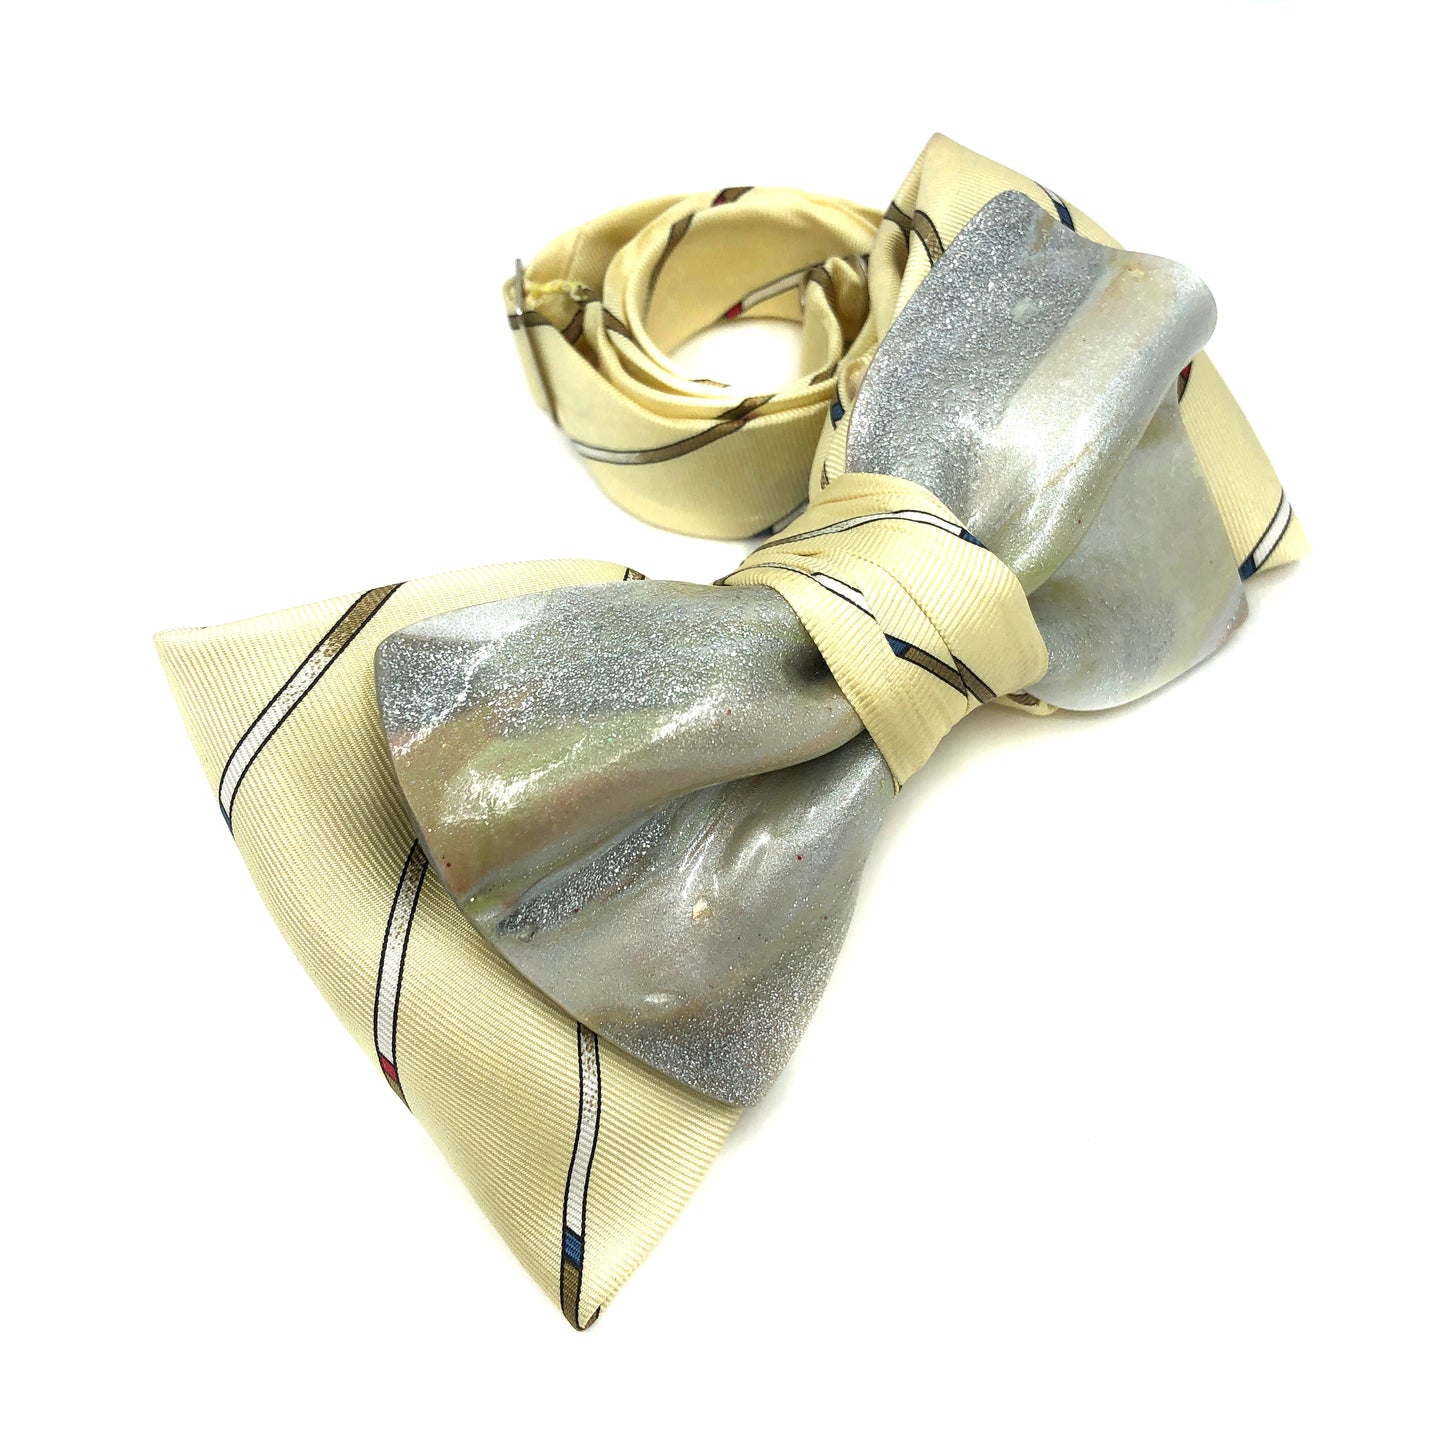 Linette Select Series Bow Tie